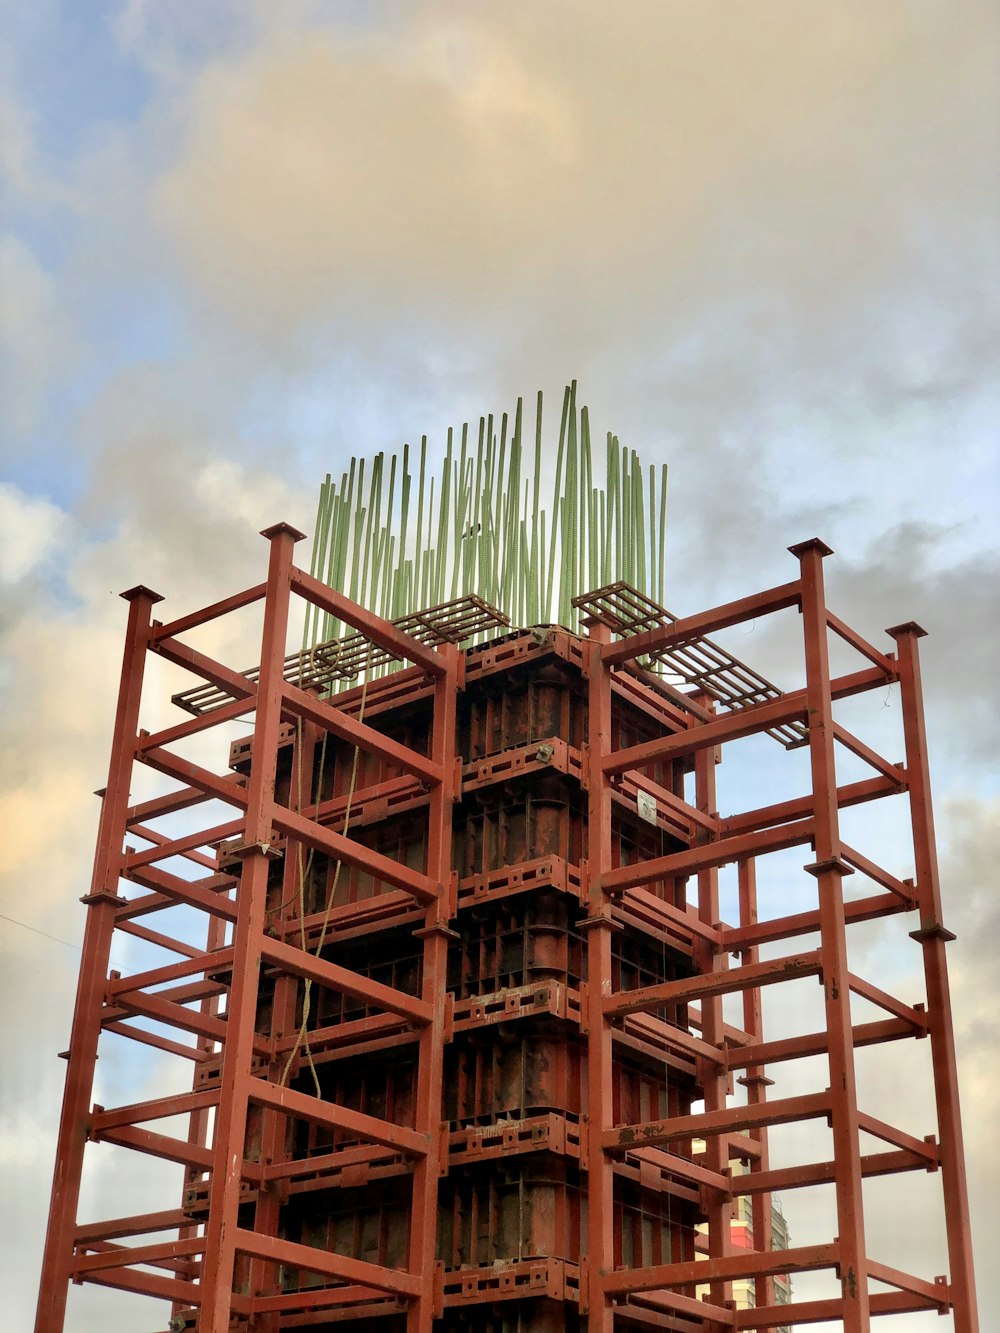 brown wooden tower under cloudy sky